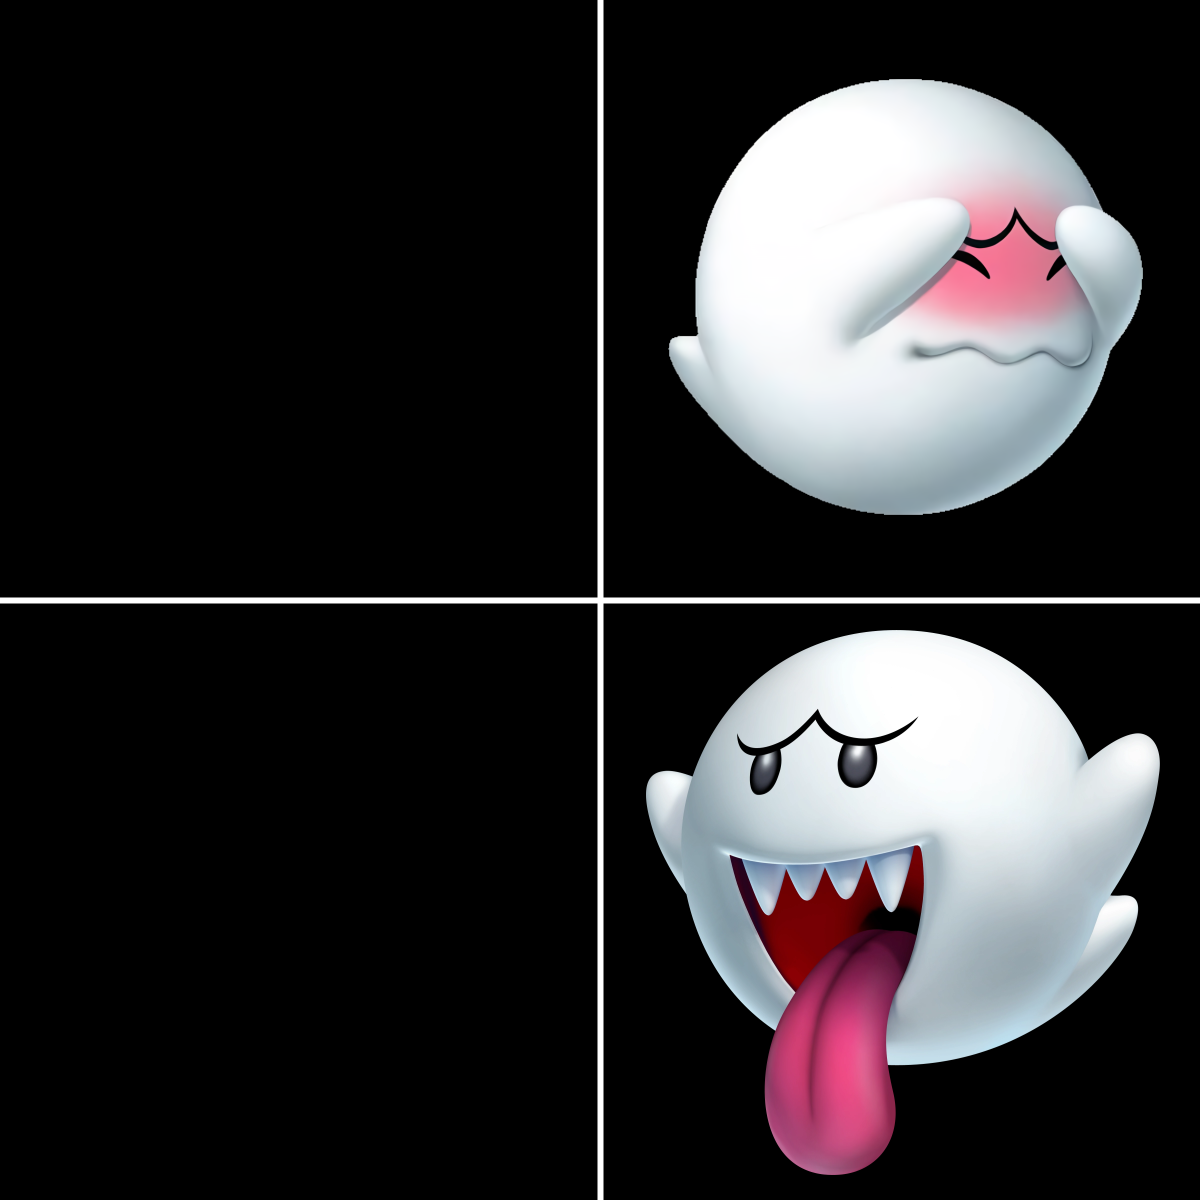 High Quality Drake alternative with Boo ghost from Super Mario (right, dark) Blank Meme Template